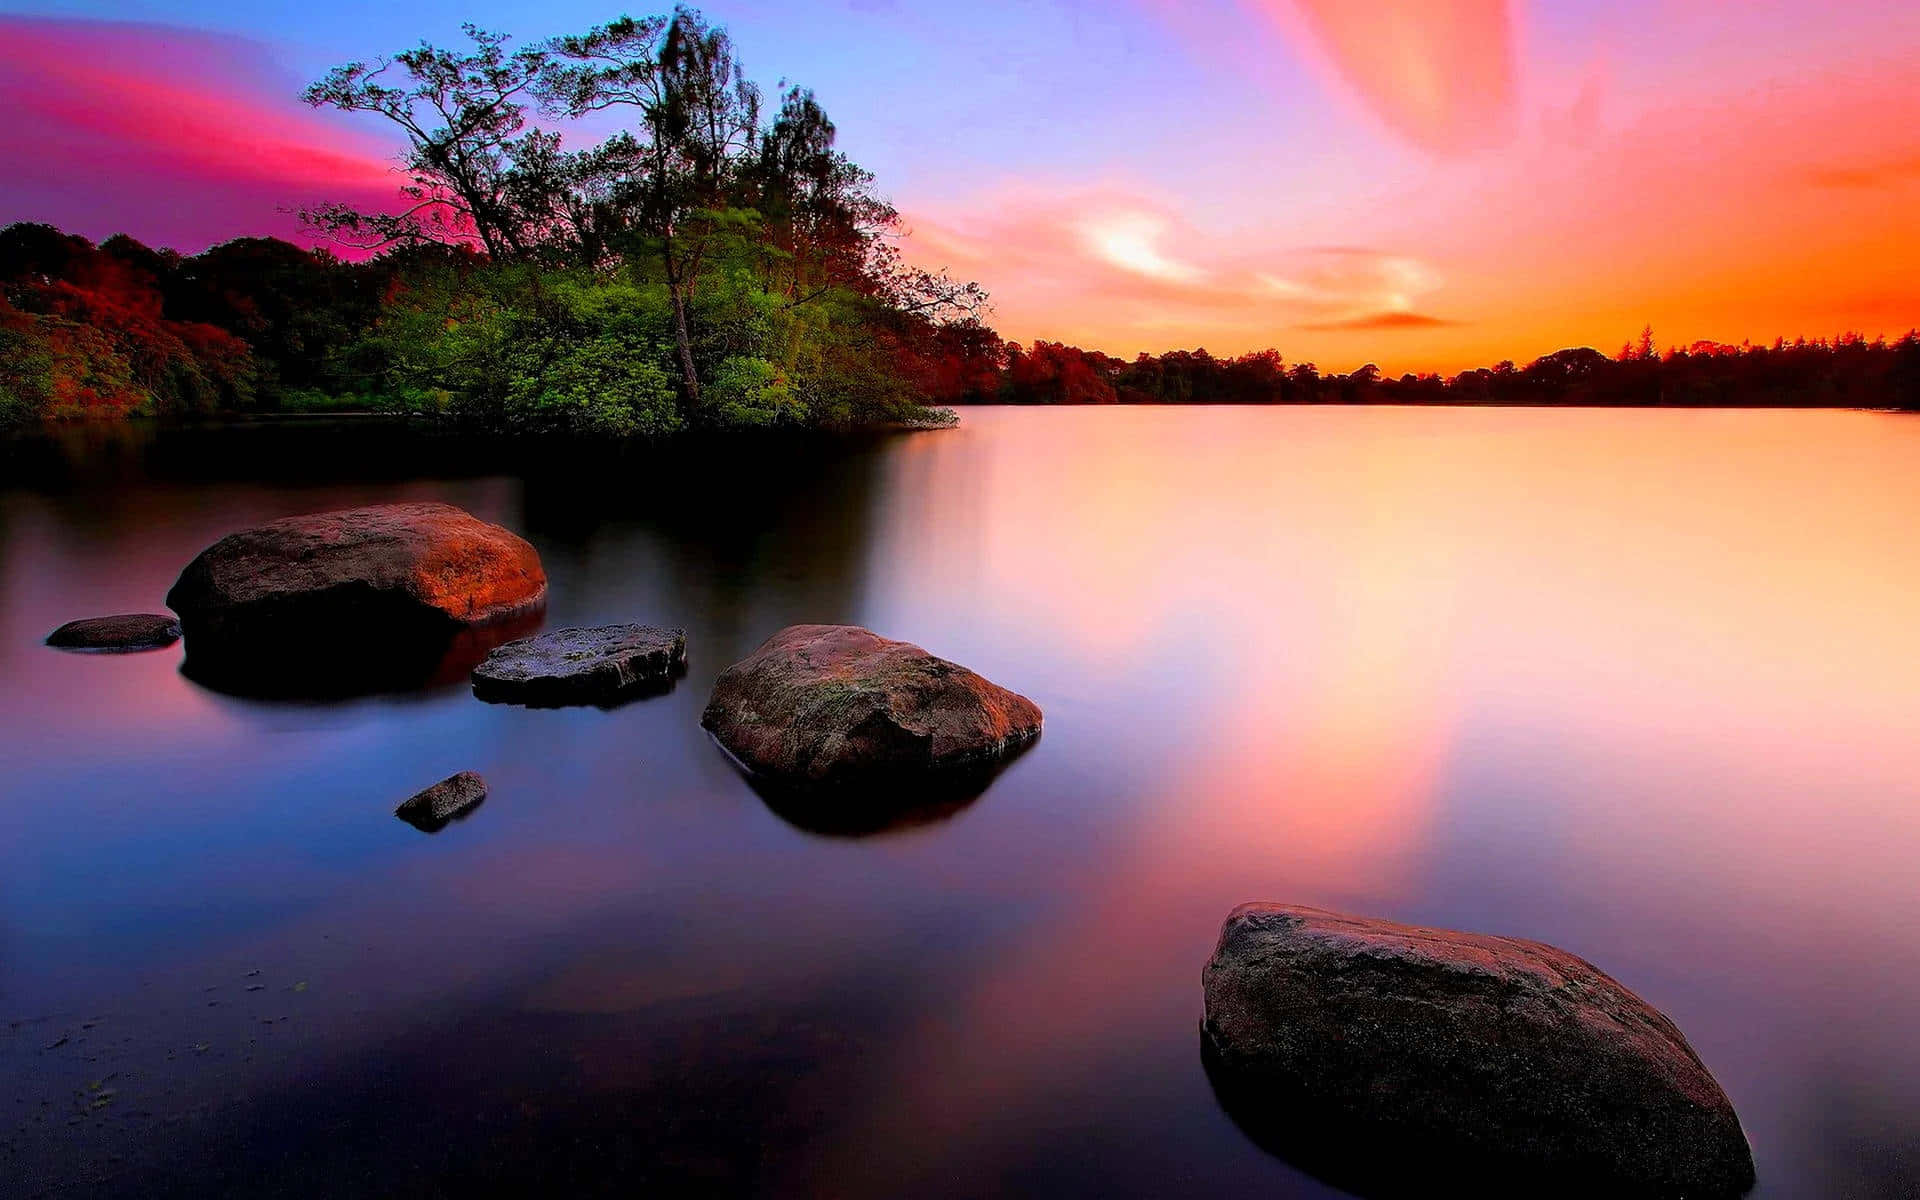 A Lake With Rocks And A Colorful Sunset